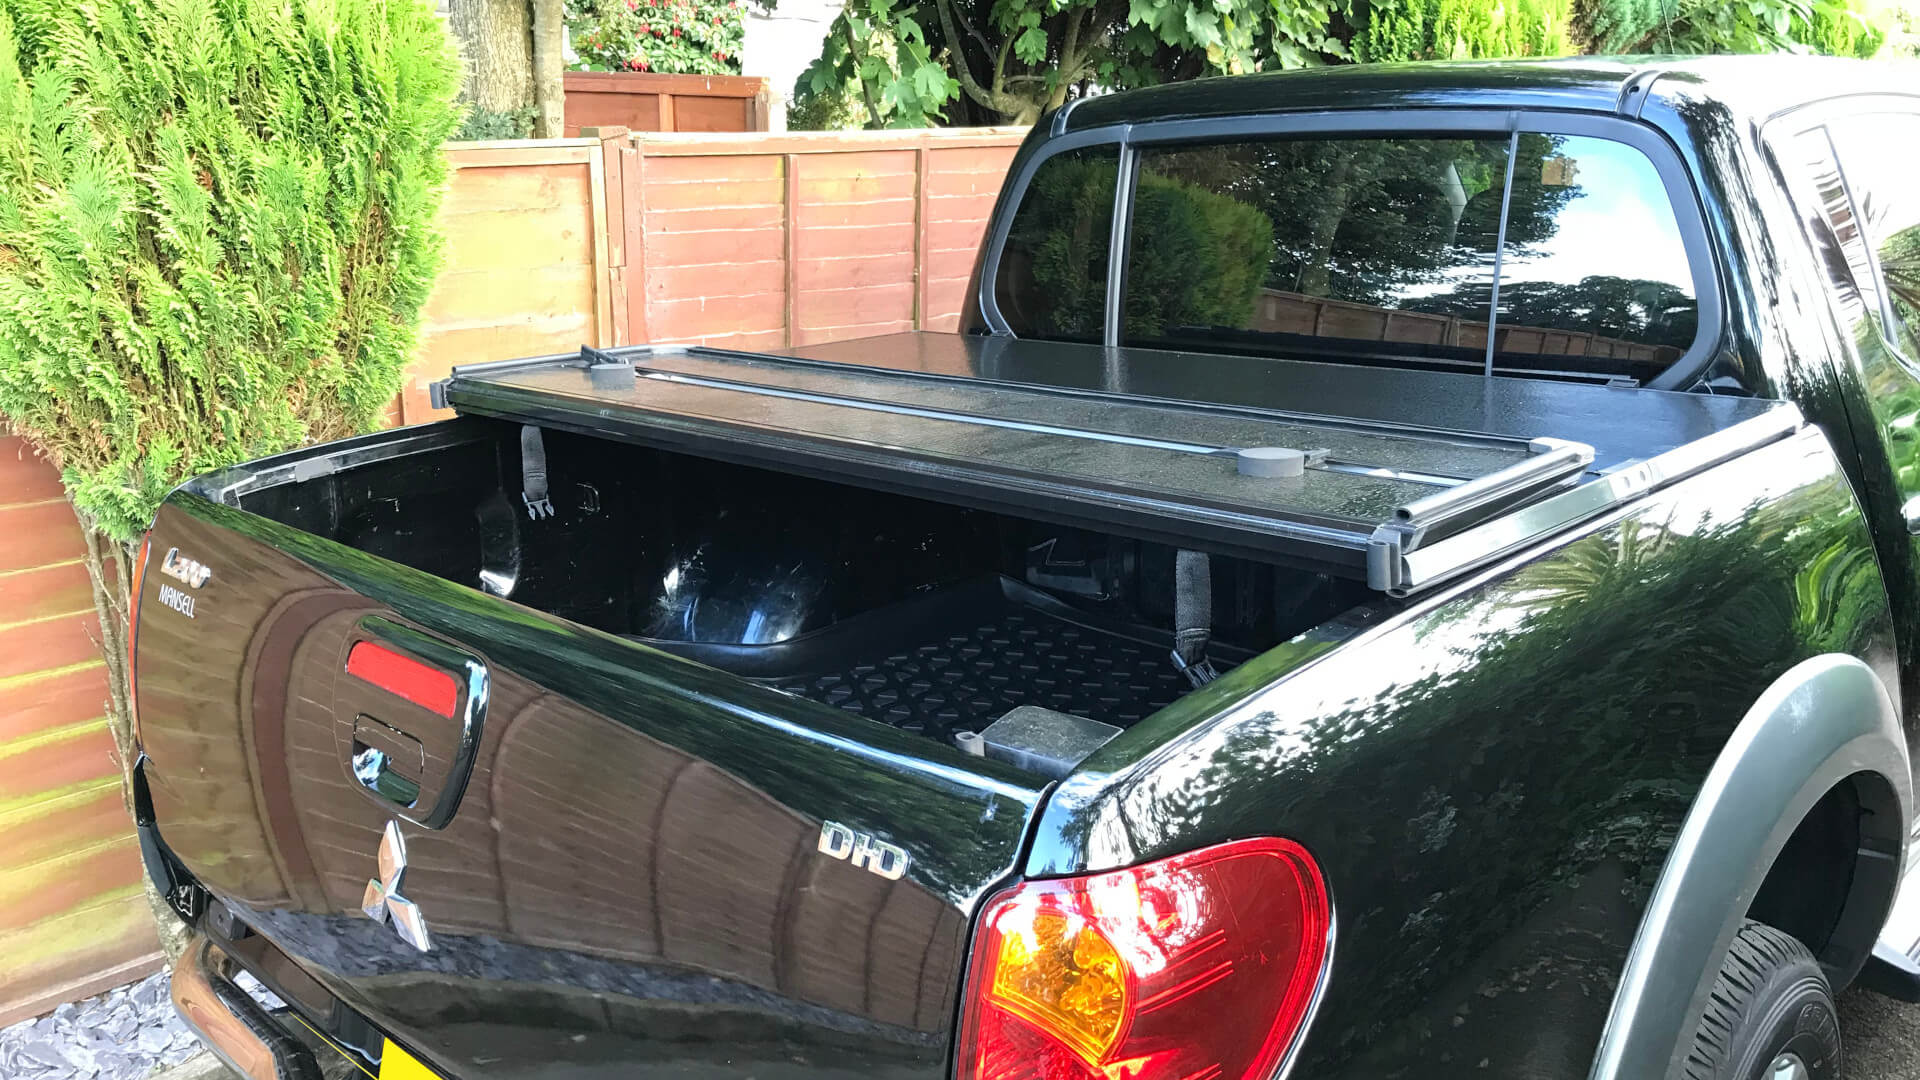 Direct4x4 load bed tonneau covers for many popular pickup trucks.